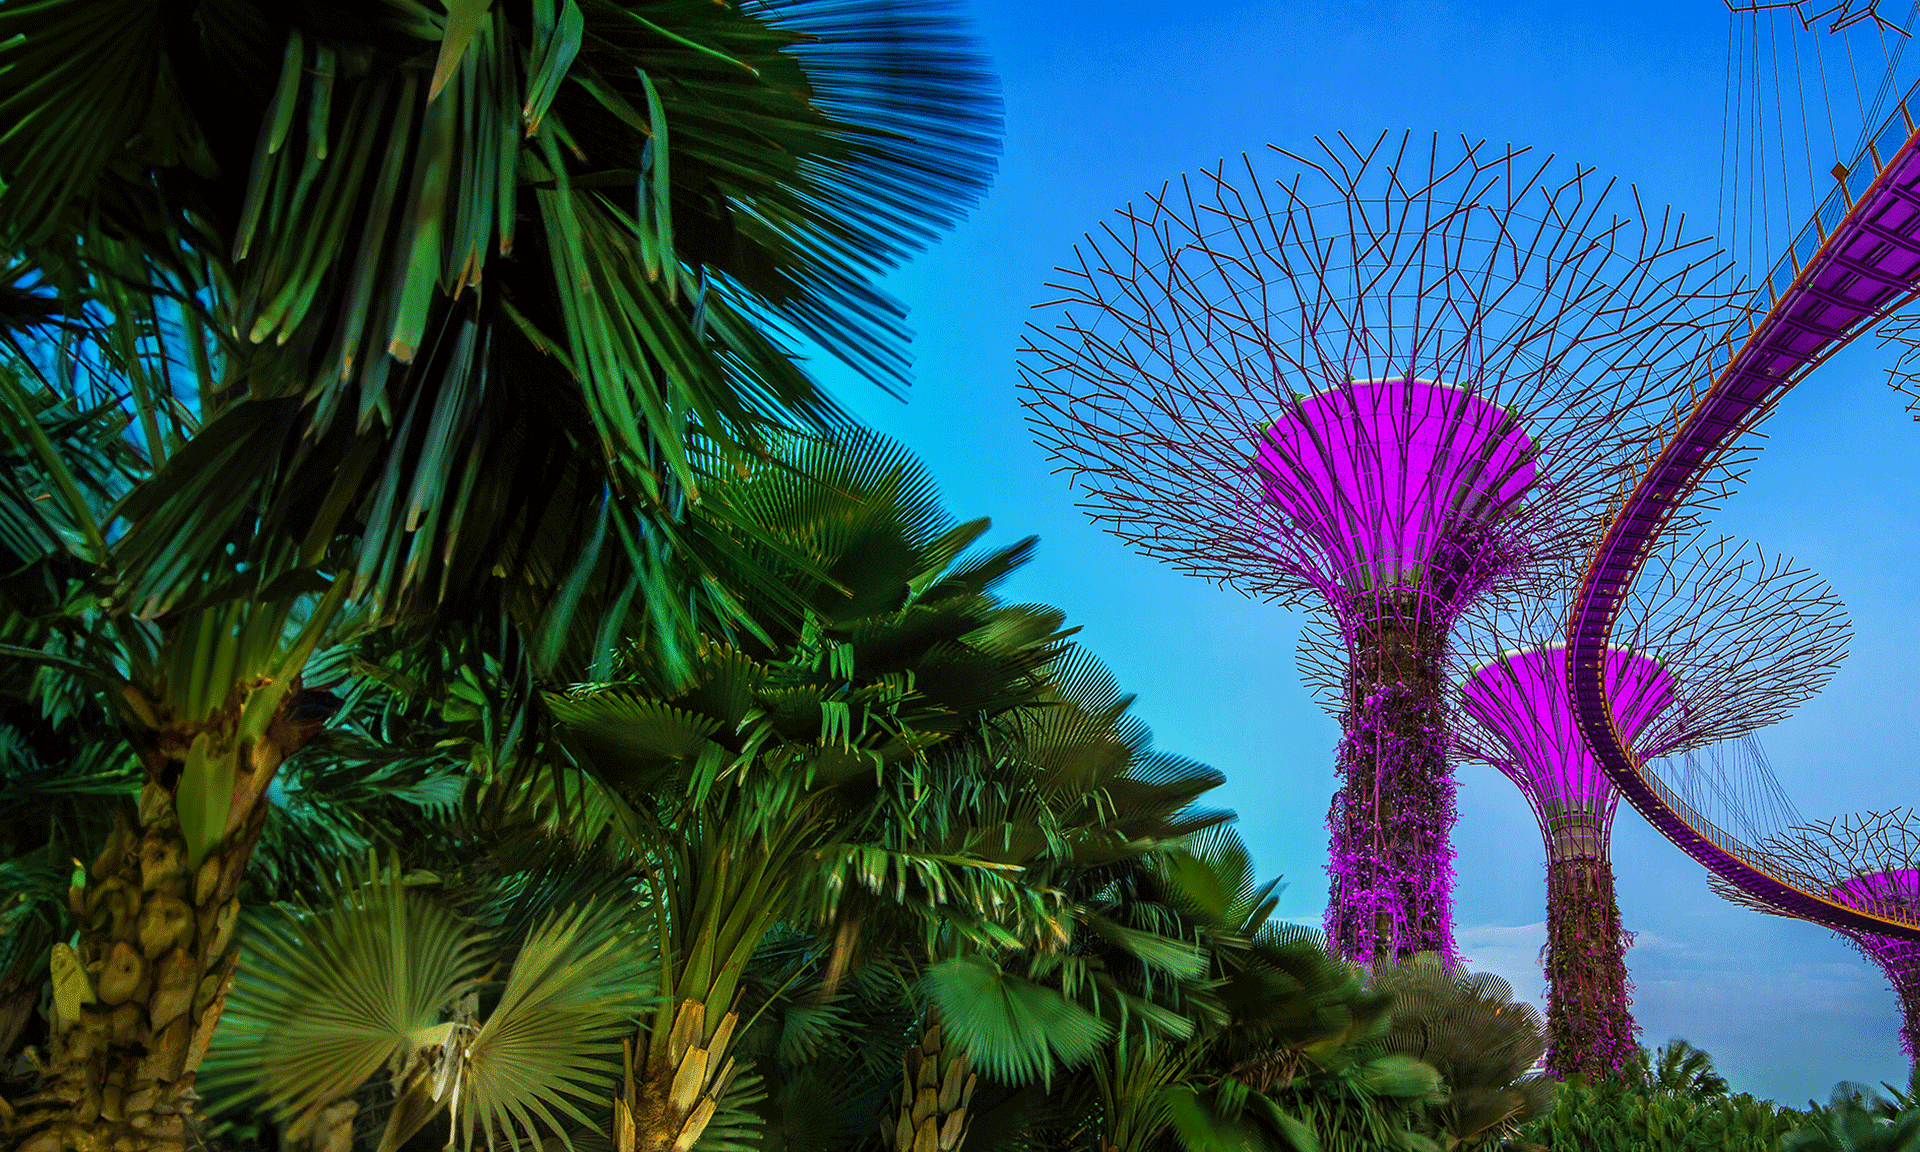 Latest Updates to the Singapore Employment Act